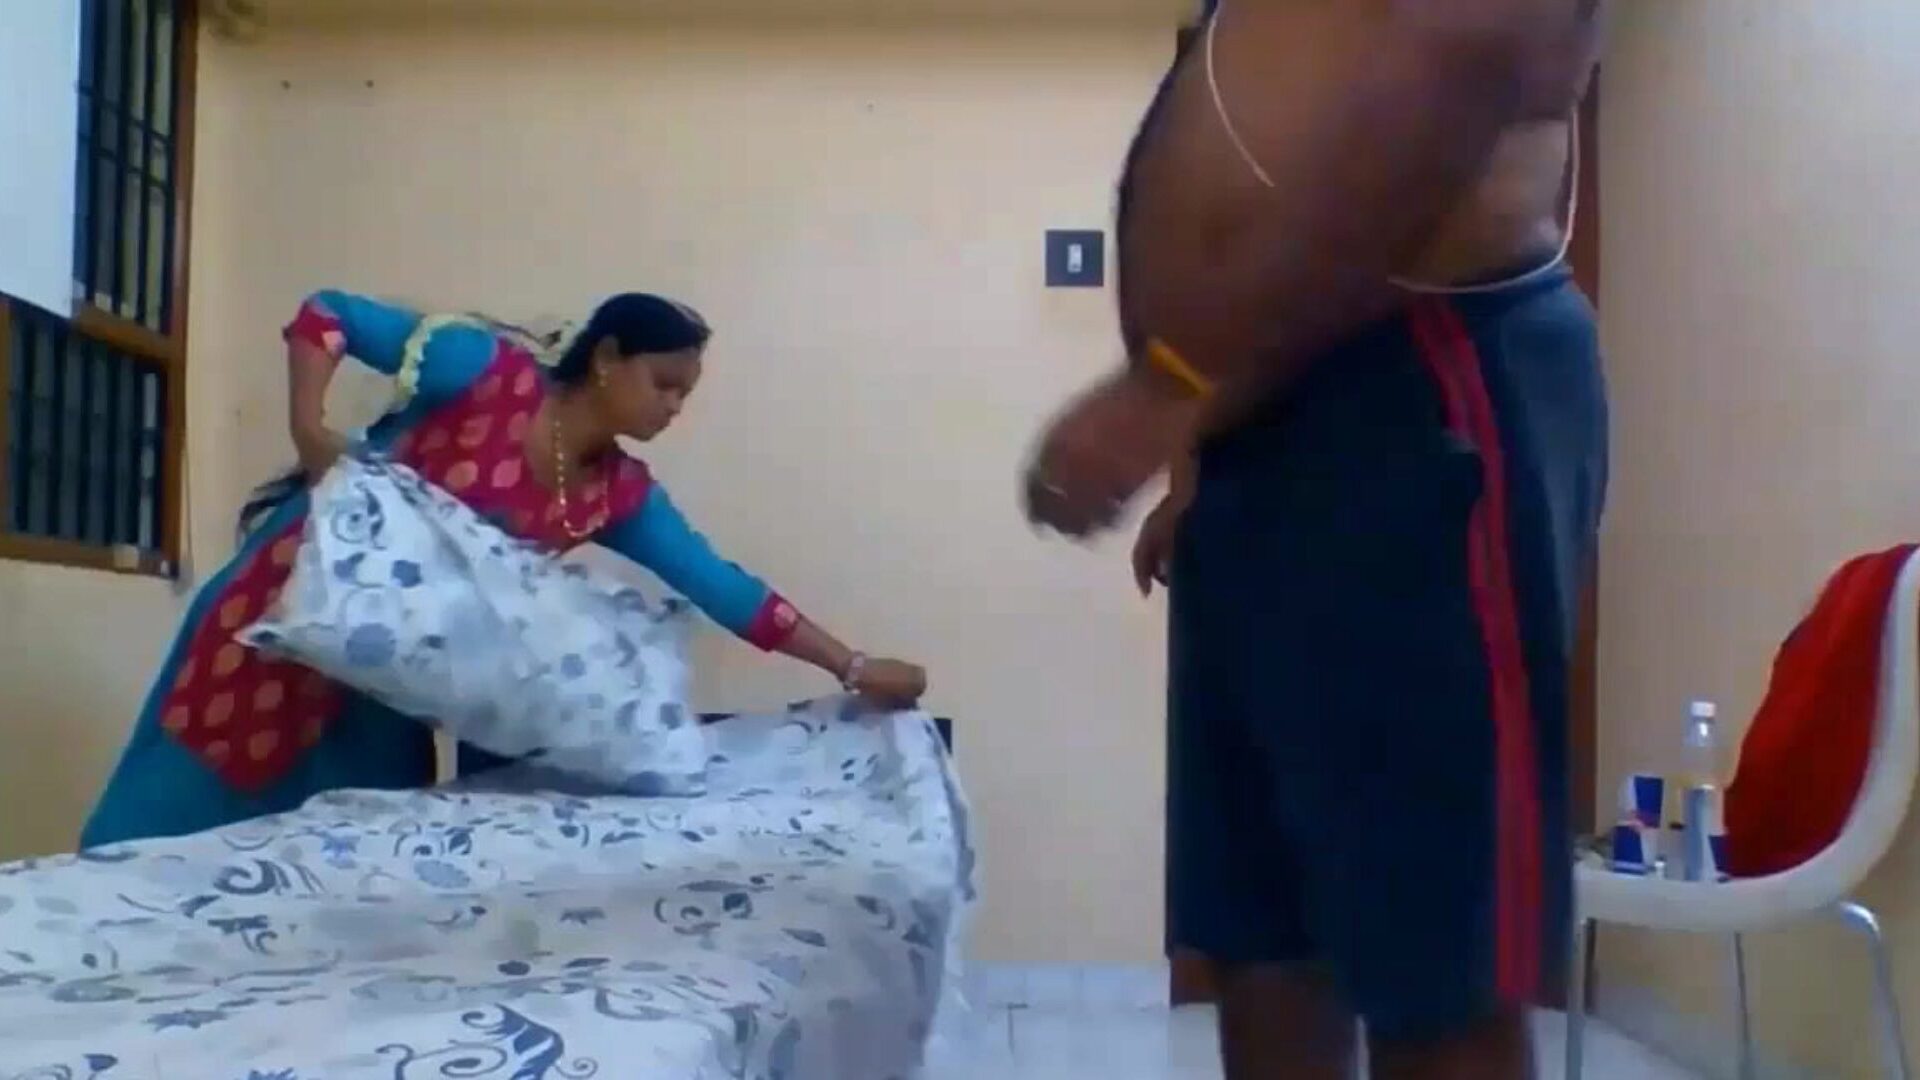 tamil fantasy: free indian hd porno video 80 - xhamster watch tamil fantasy tube fuckfest video for-for-all on xhamster, with the dominant bevy of indian tamil tube & mobile tamil hd porno film gigs